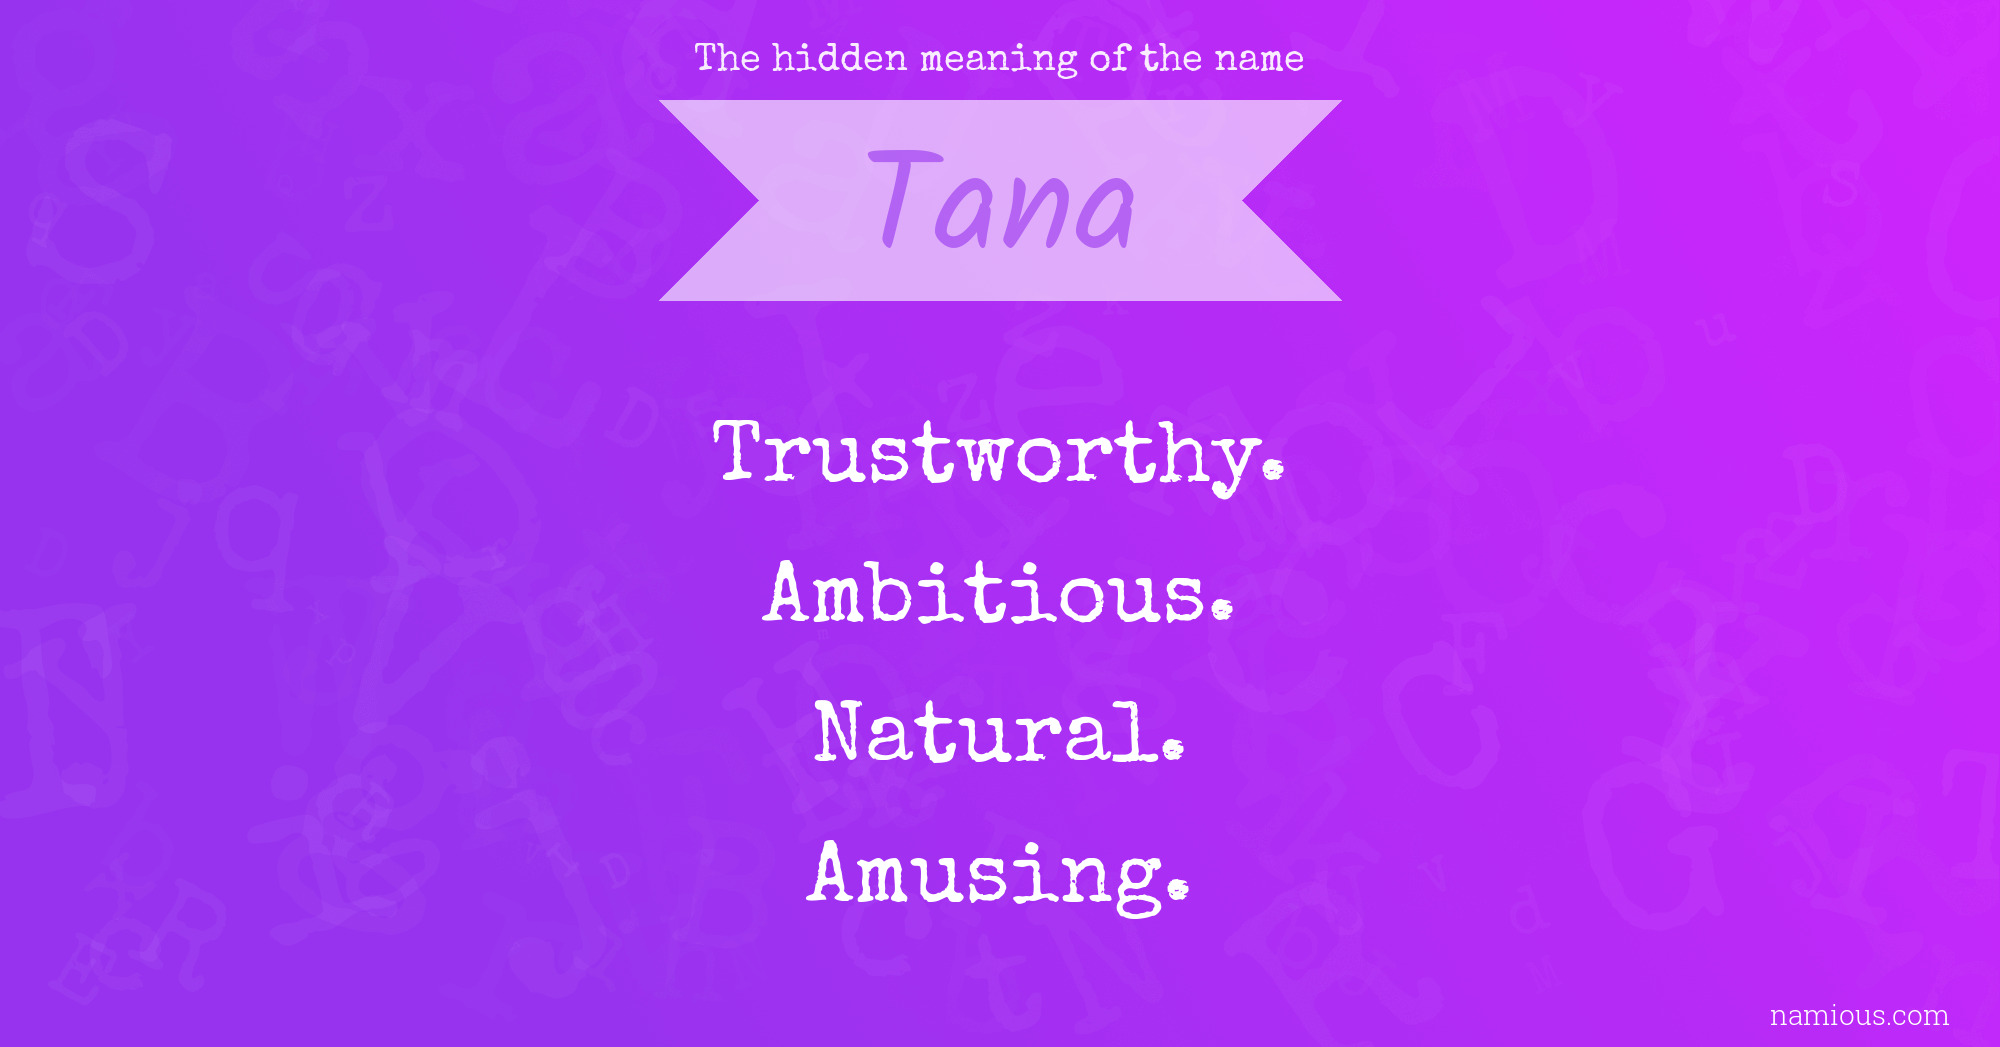 The hidden meaning of the name Tana